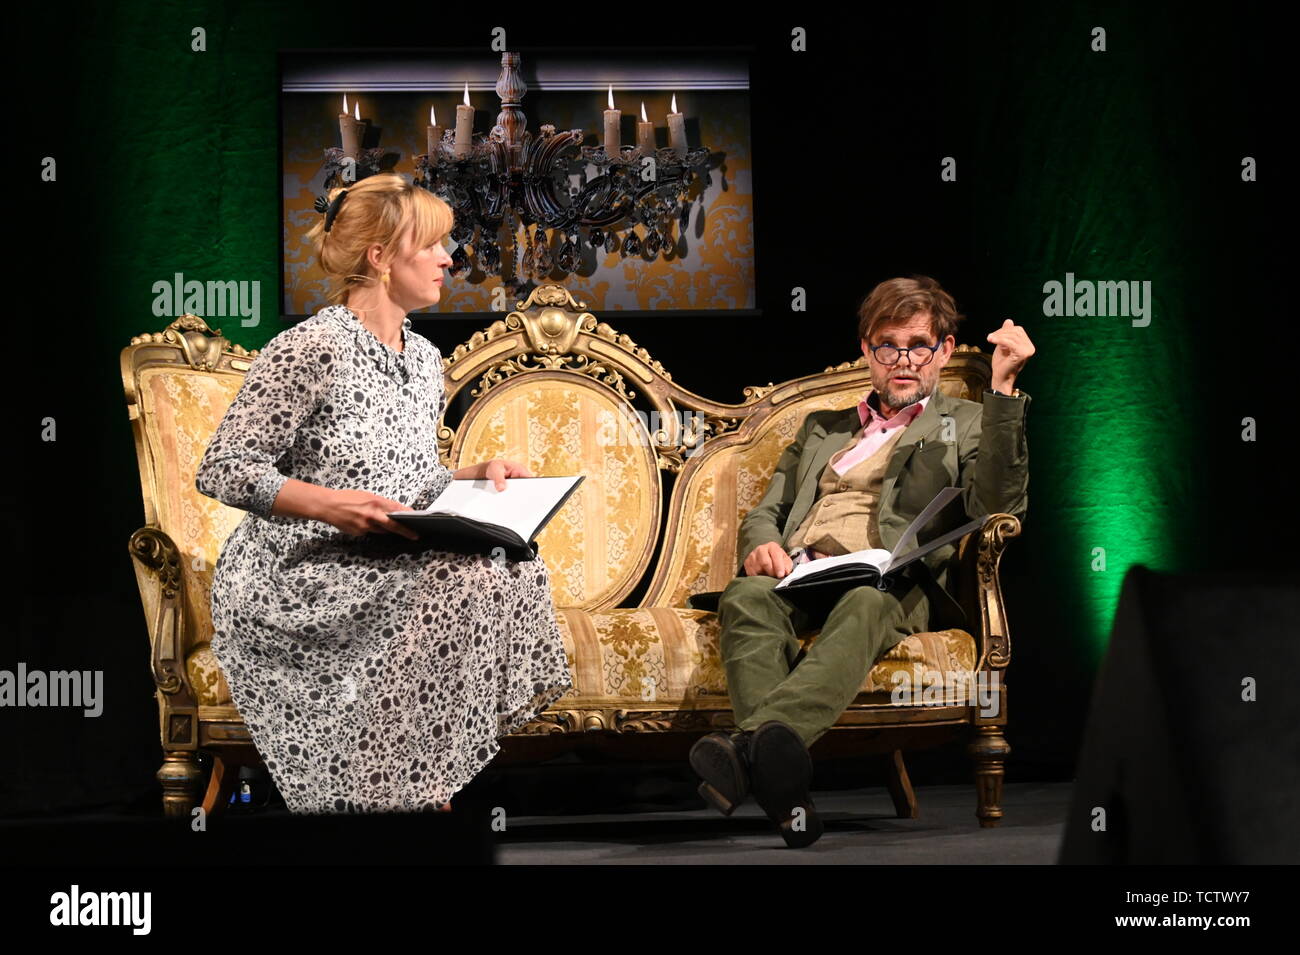 Cologne, Germany. 09th June, 2019. The actors Jördis Triebel and Lars Rudolph sit on a sofa and read Diderot at the 7th phil.cologne, the biggest German philosophy festival. Credit: Horst Galuschka/dpa/Alamy Live News Stock Photo